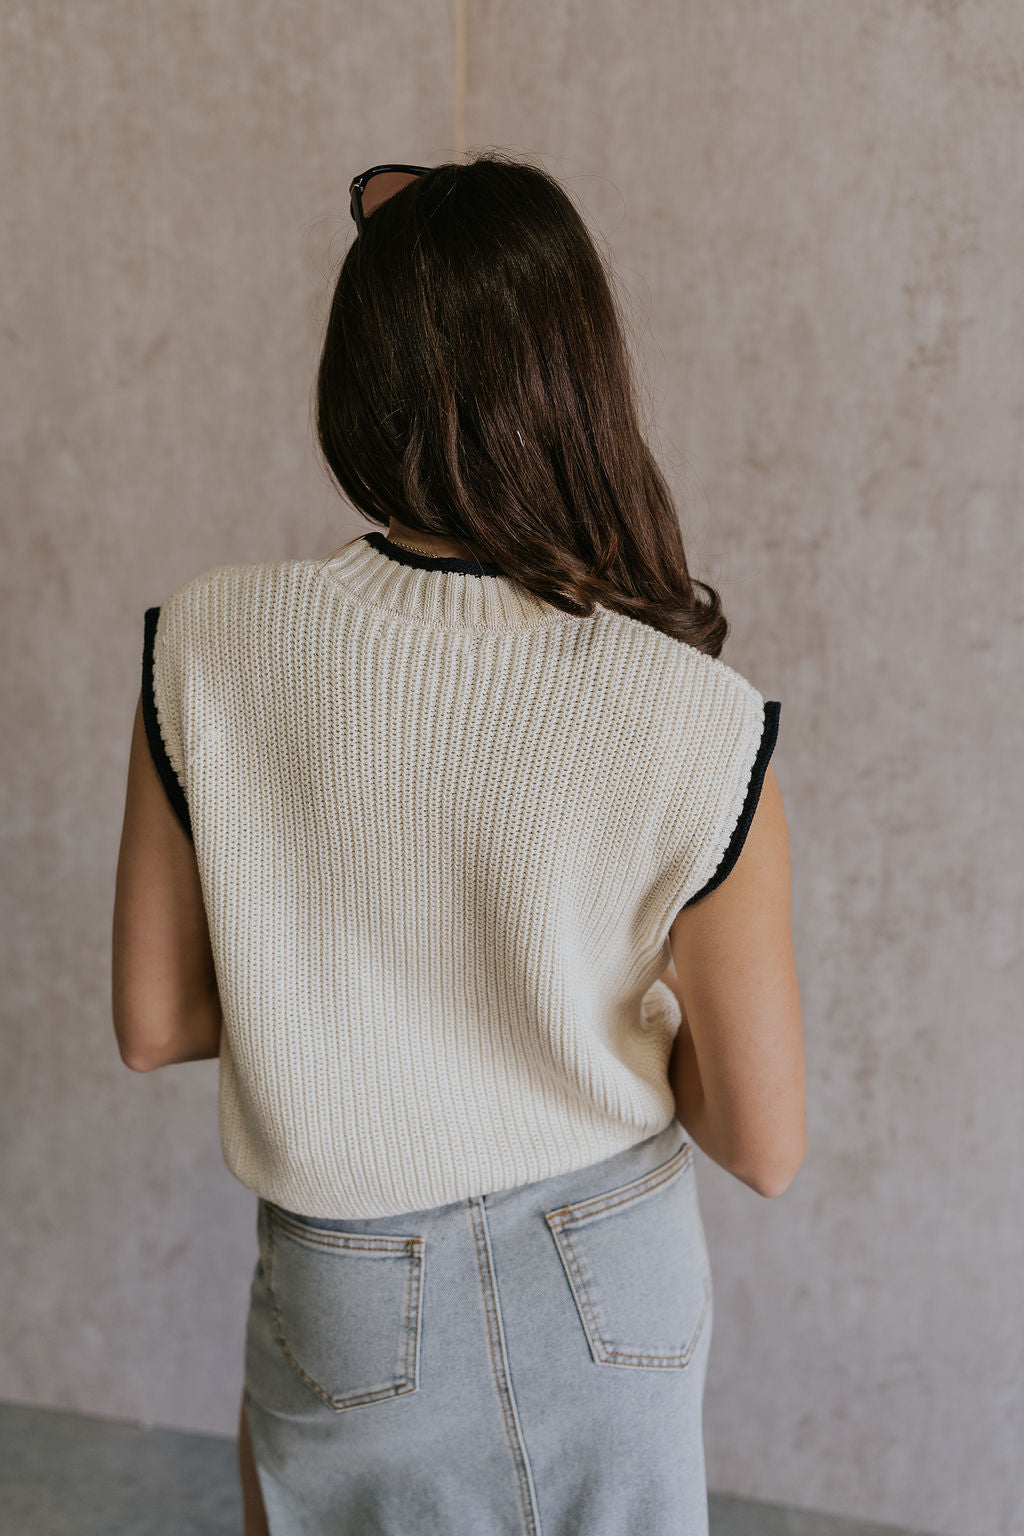 Back view of female model wearing the Vivian Ivory & Navy Knit Sleeveless Sweater which features Cream Cable Knit Fabric, Navy Trim Details, Left Front Chest Pocket, High Neckline and Sleeveless.